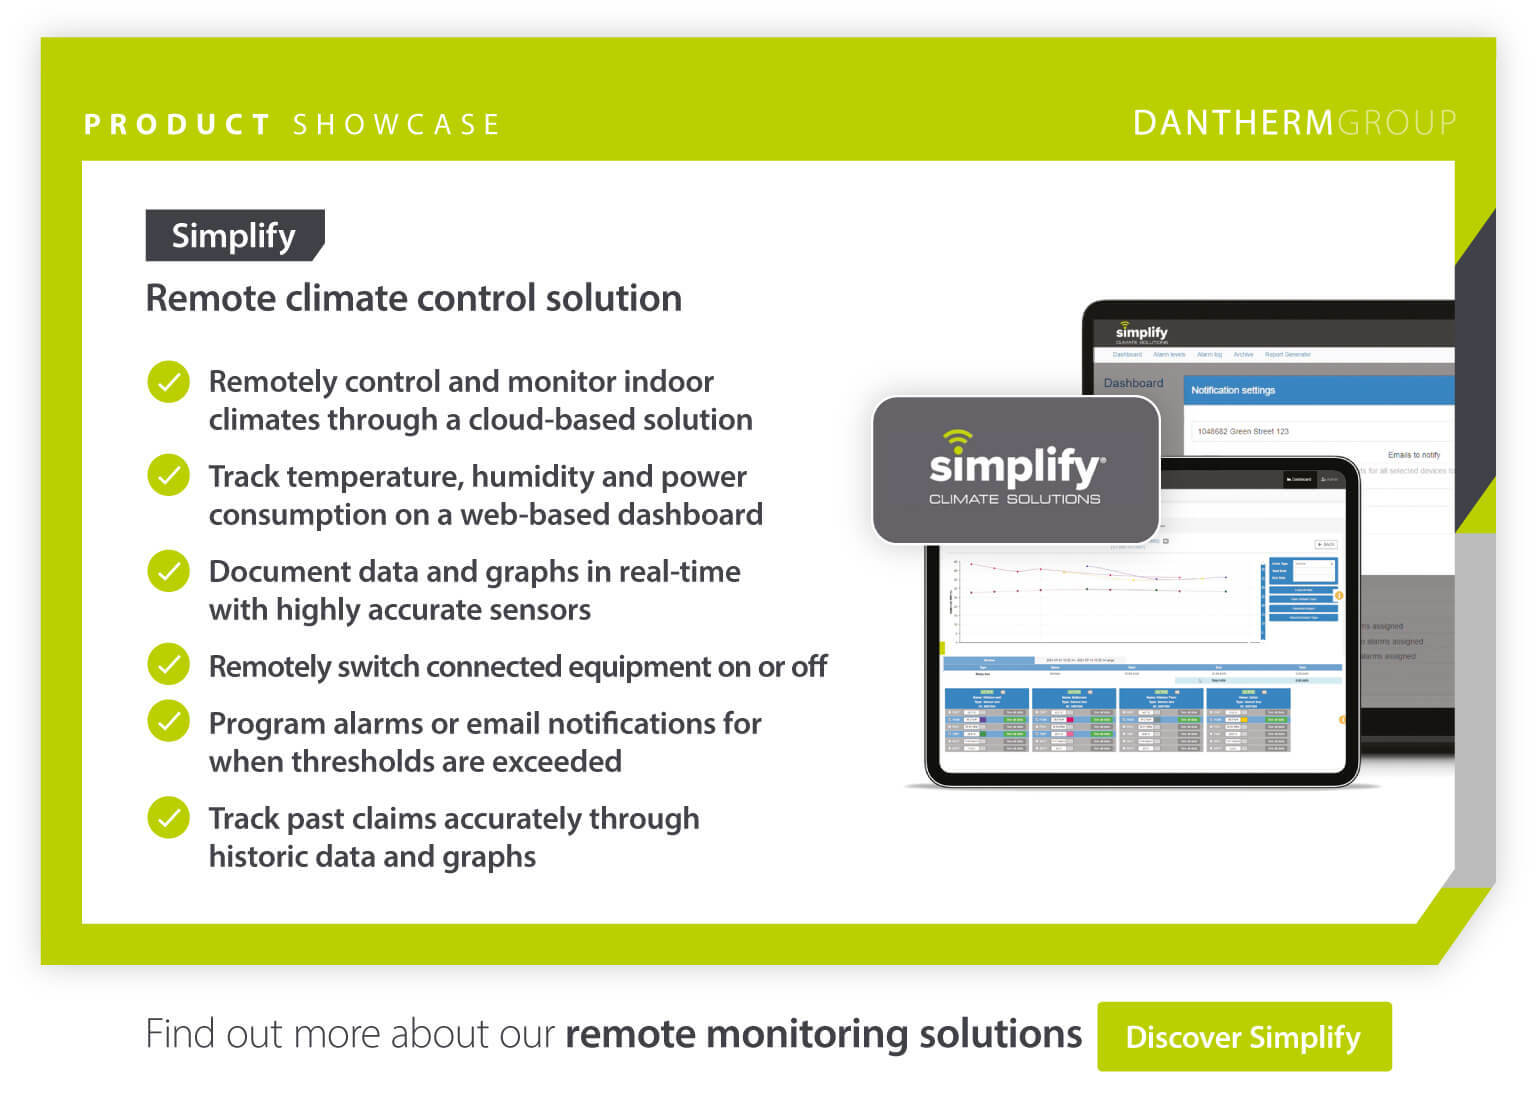 Remote monitoring indoor climate control system product showcase with features